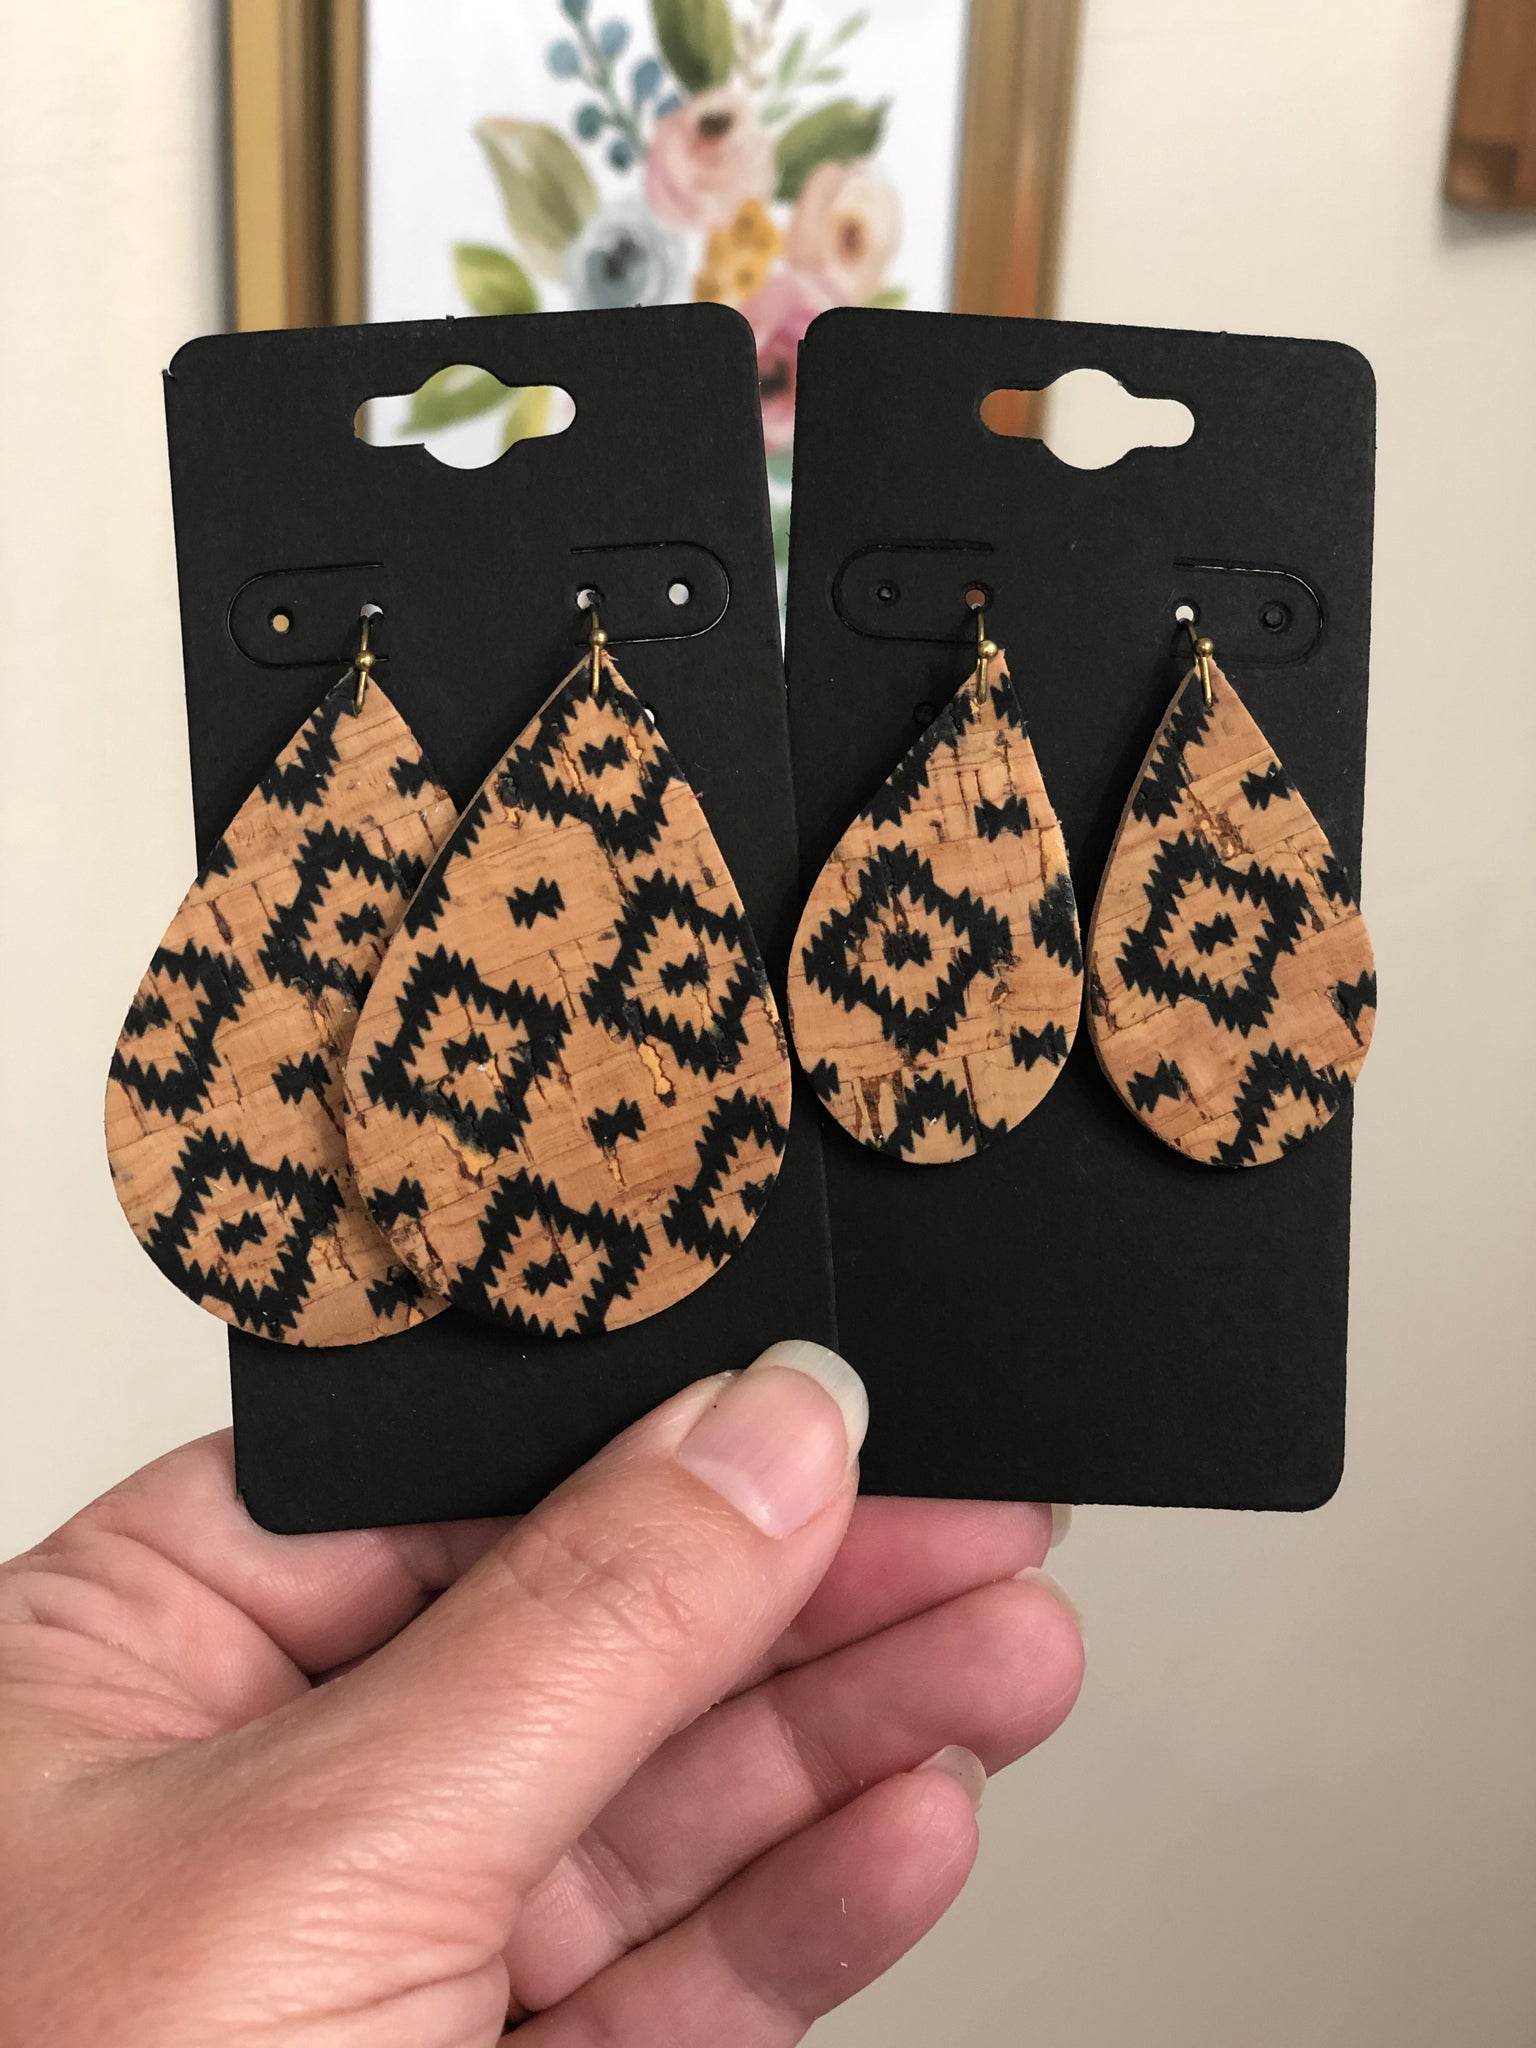 Basic Tan Cork with a Black Aztec Print on Leather Earrings